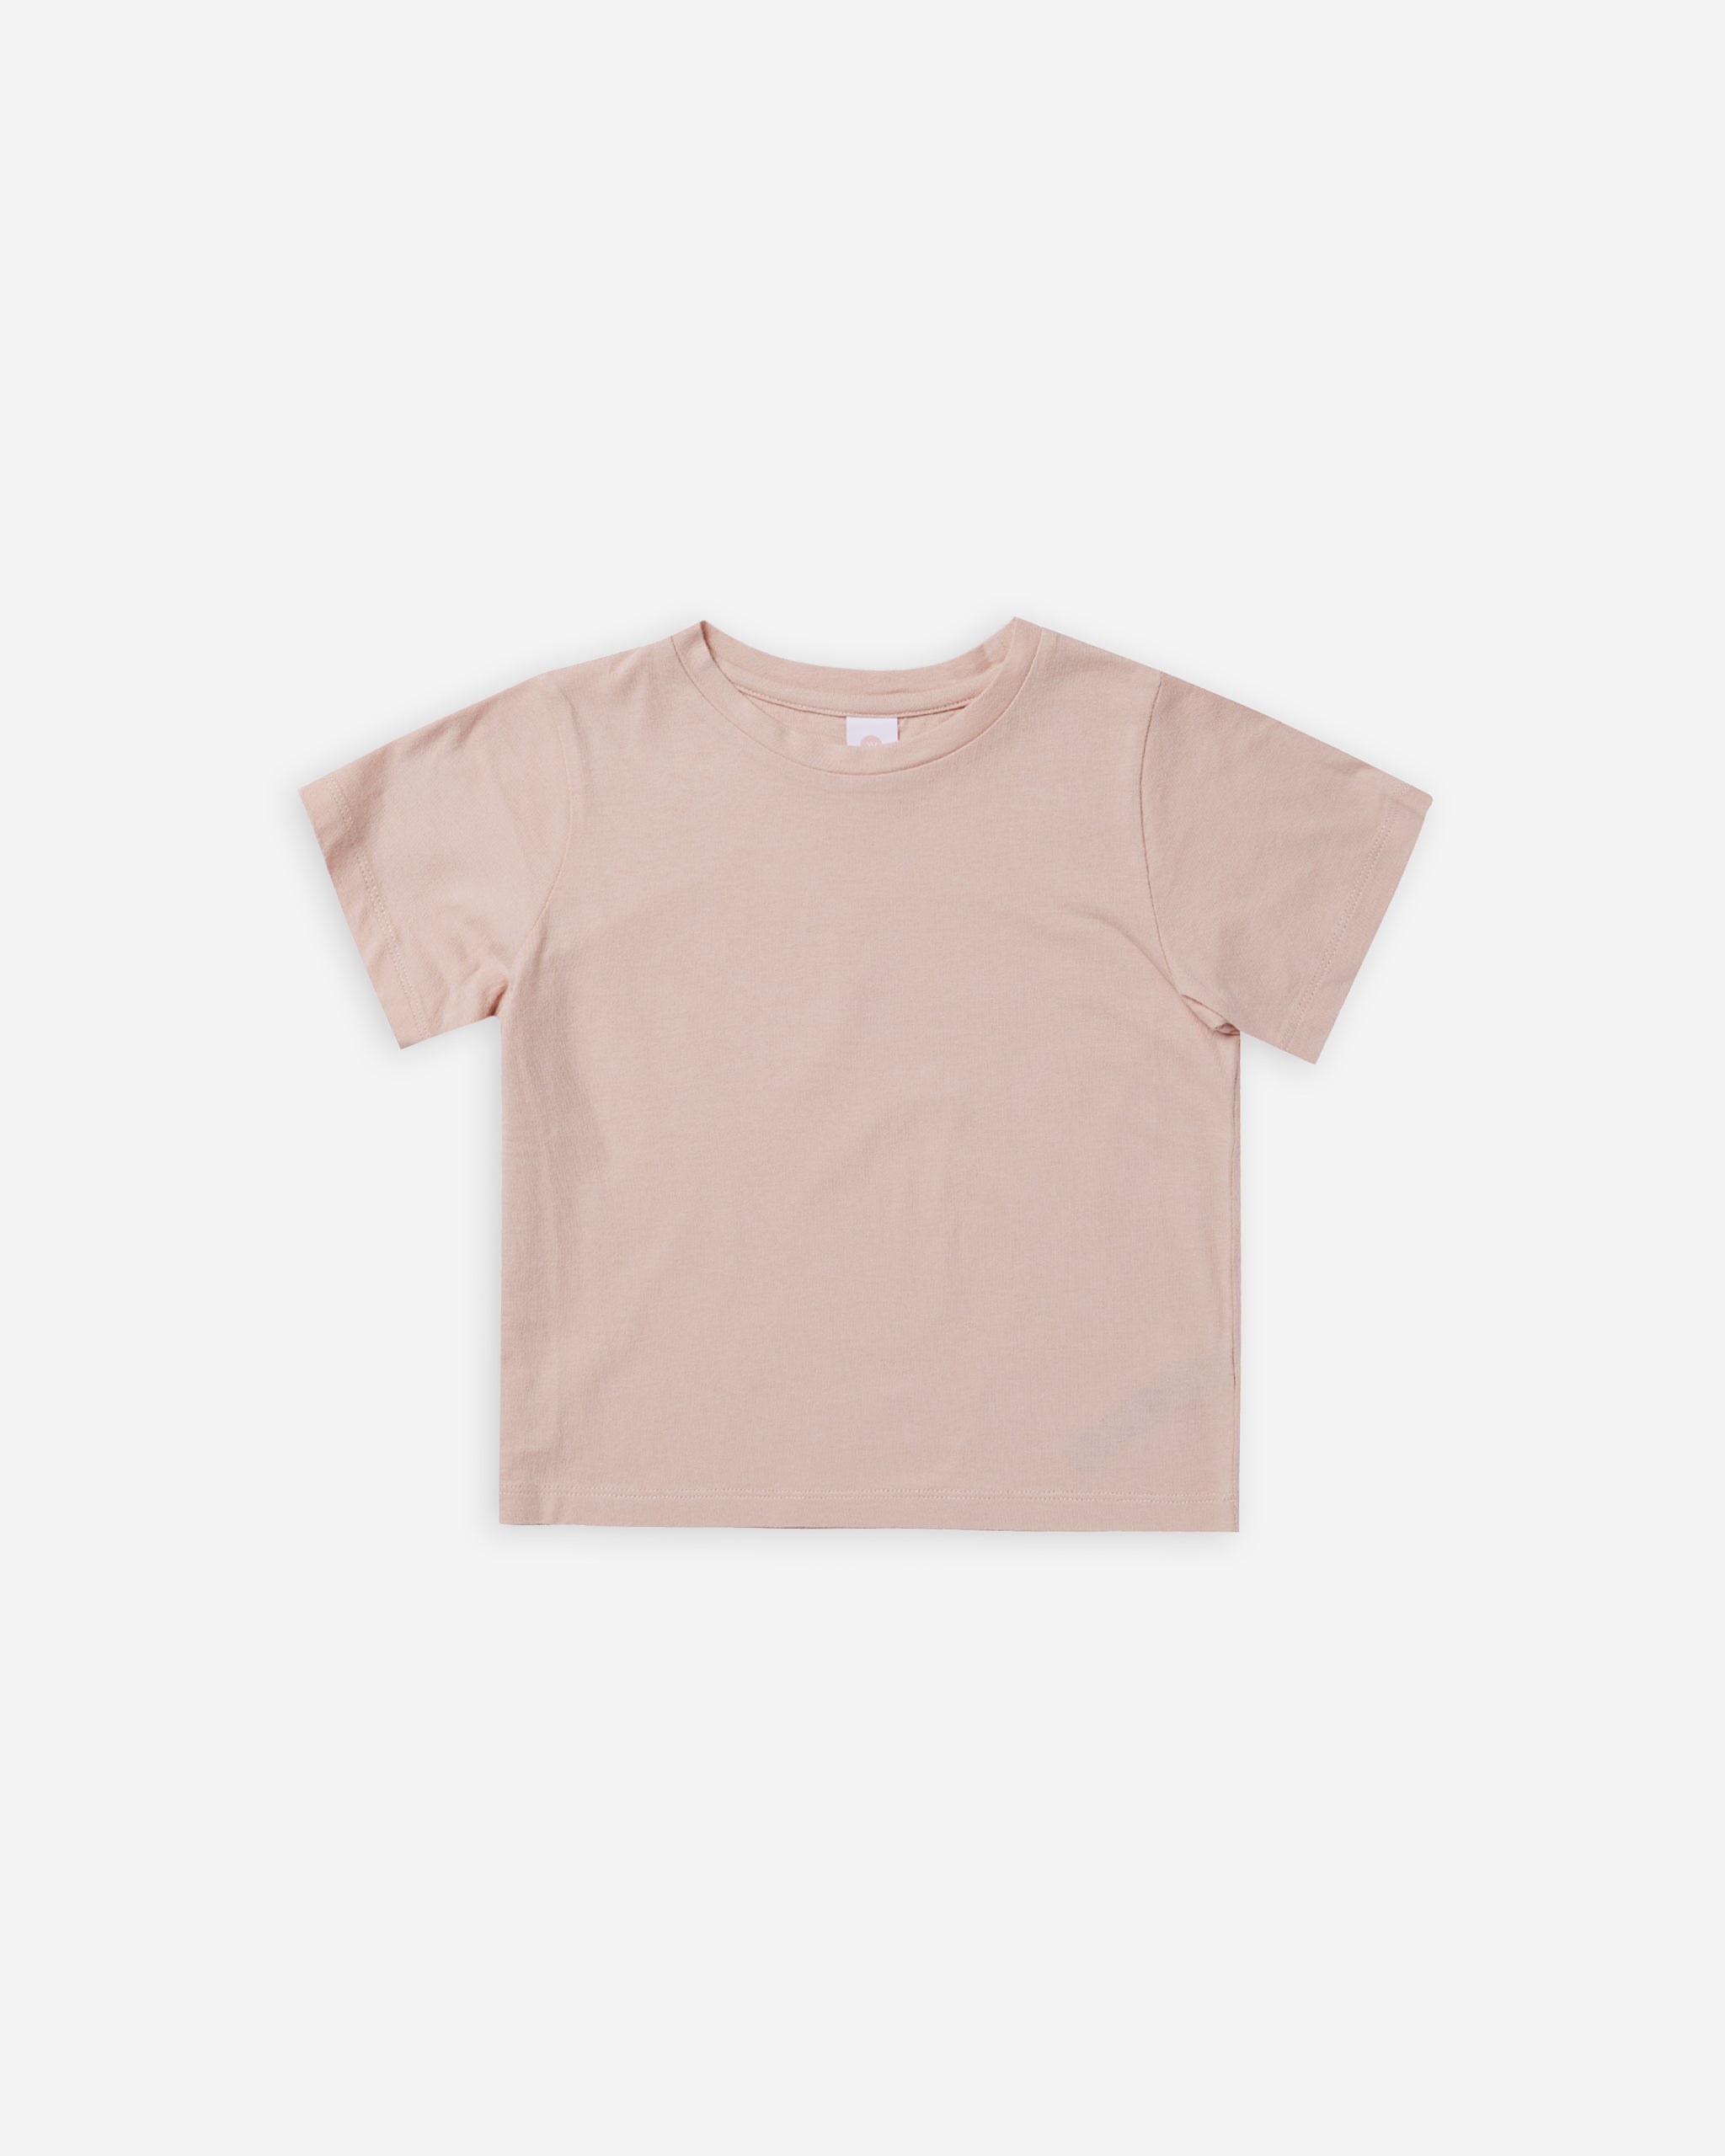 Torrey Essential Tee | Blush - Rylee + Cru | Kids Clothes | Trendy Baby Clothes | Modern Infant Outfits |